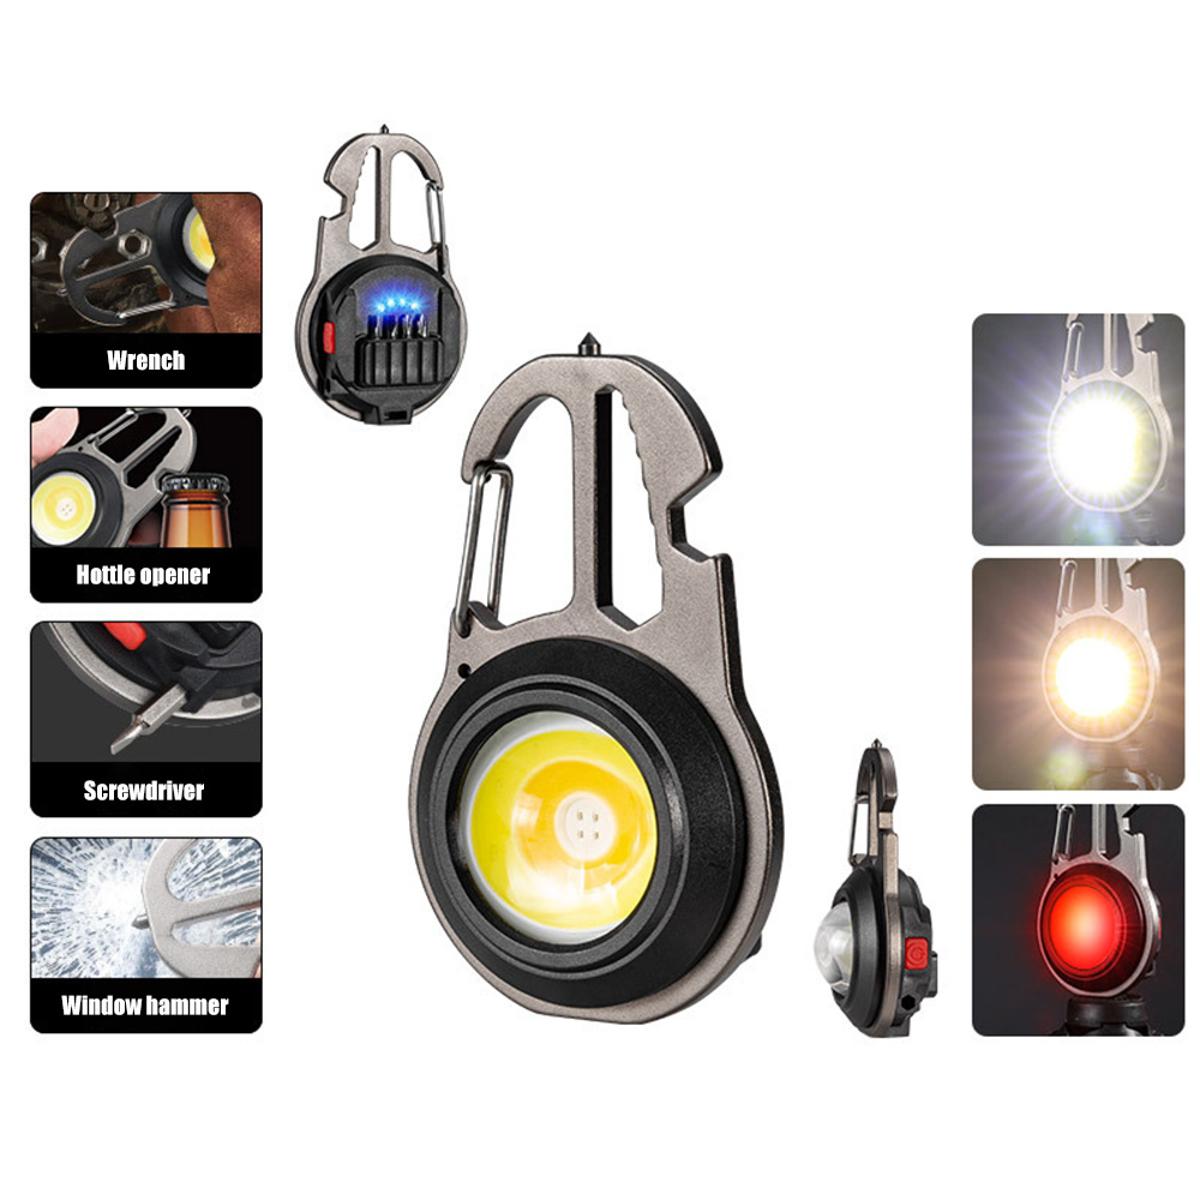 6 In 1 Keychain Flashlight Portable Type-C Fast Charge Super Bright LED Work Light 500 Lumens COB Torch Light Powerful Multi-Purpose Keychain Light Outdoor Waterproof Camping Strong Magnetic Emergency Lights 4 Lighting Modes With Wrench Screwdriver